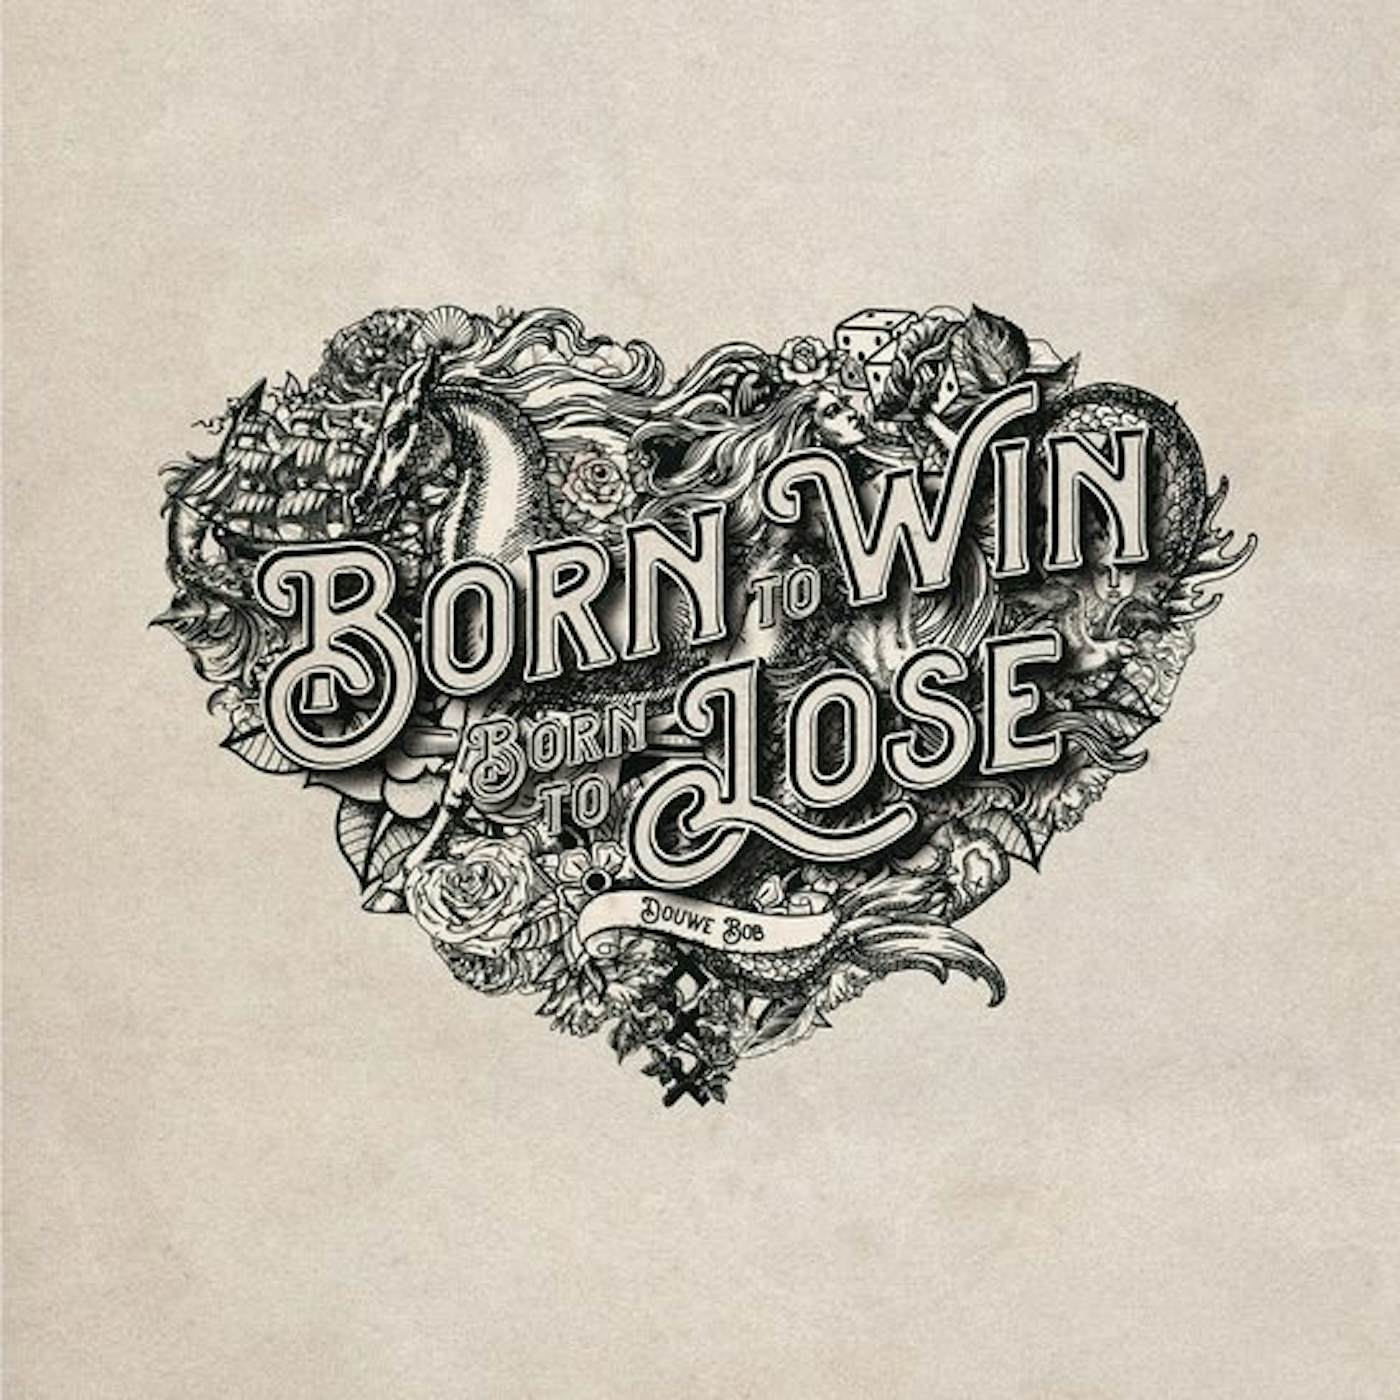 Douwe Bob BORN TO WIN, BORN TO LOSE (LIMITED/CLEAR VINYL/180G/INSERT/GATEFOLD/NUMBERED/IMPORT) Vinyl Record